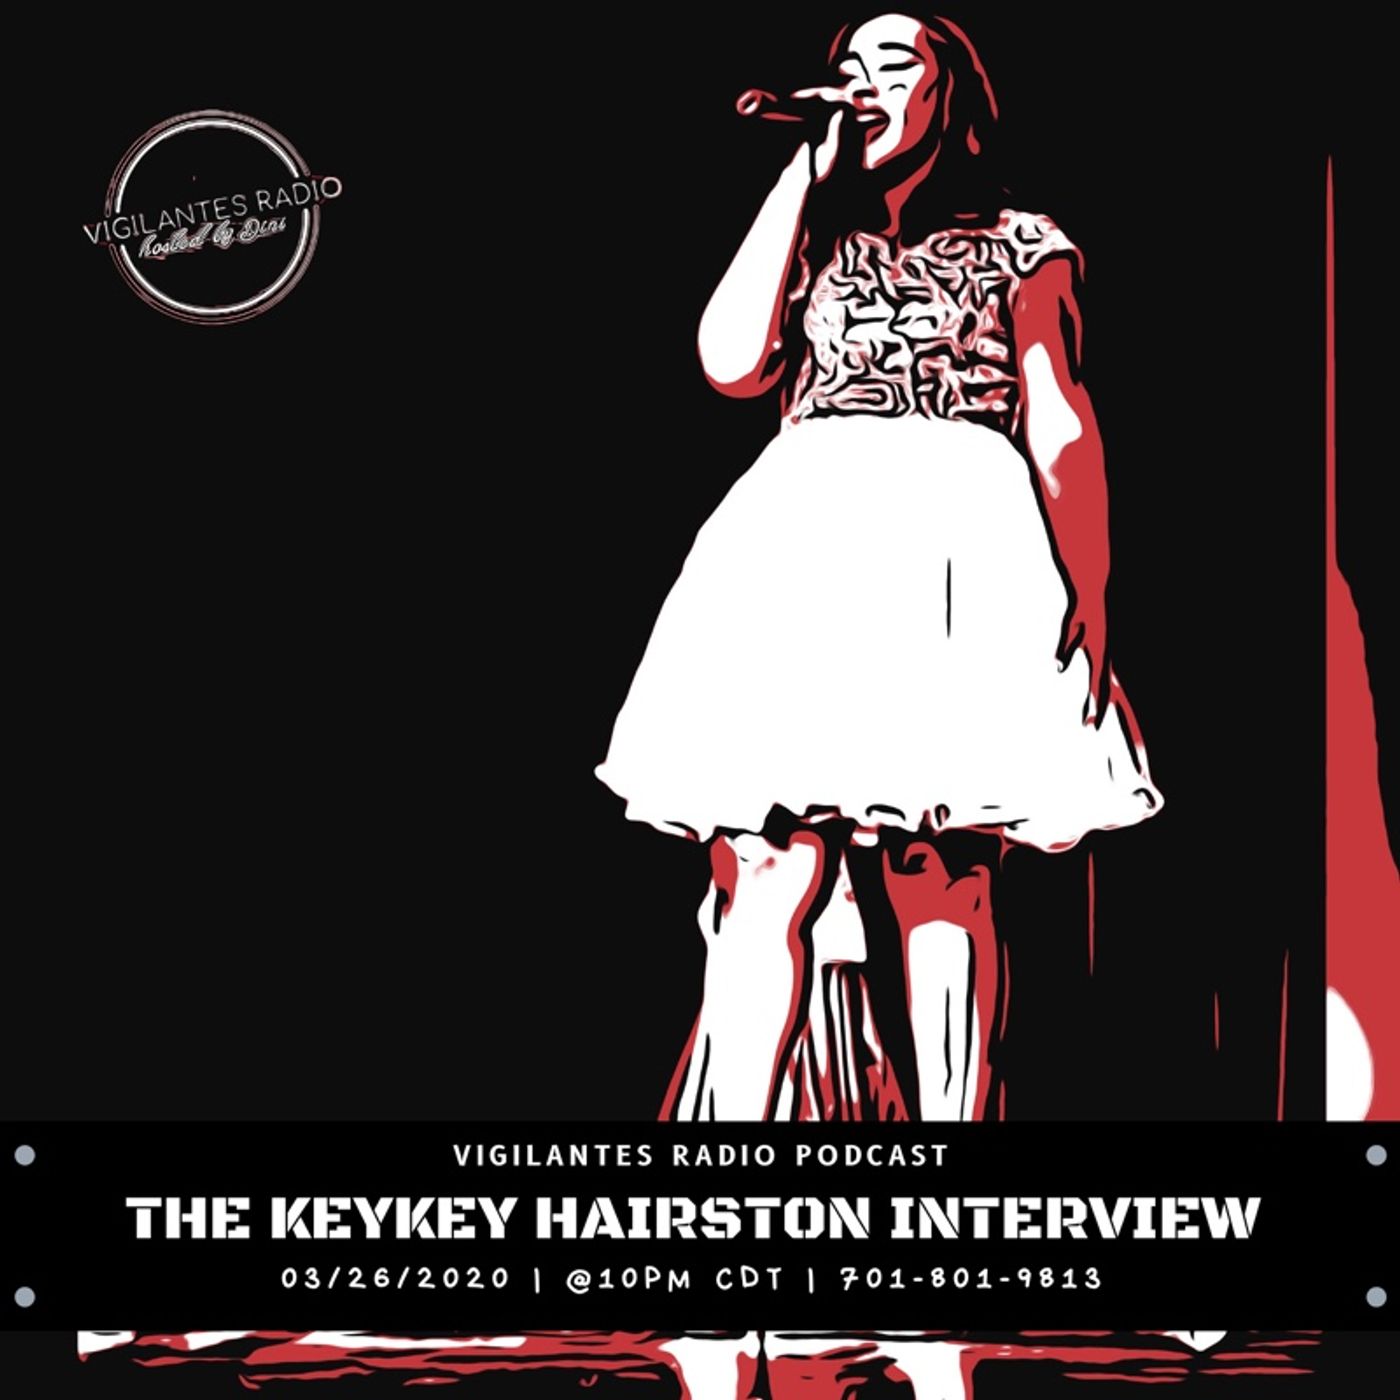 The Keykey Hairston Interview. Image